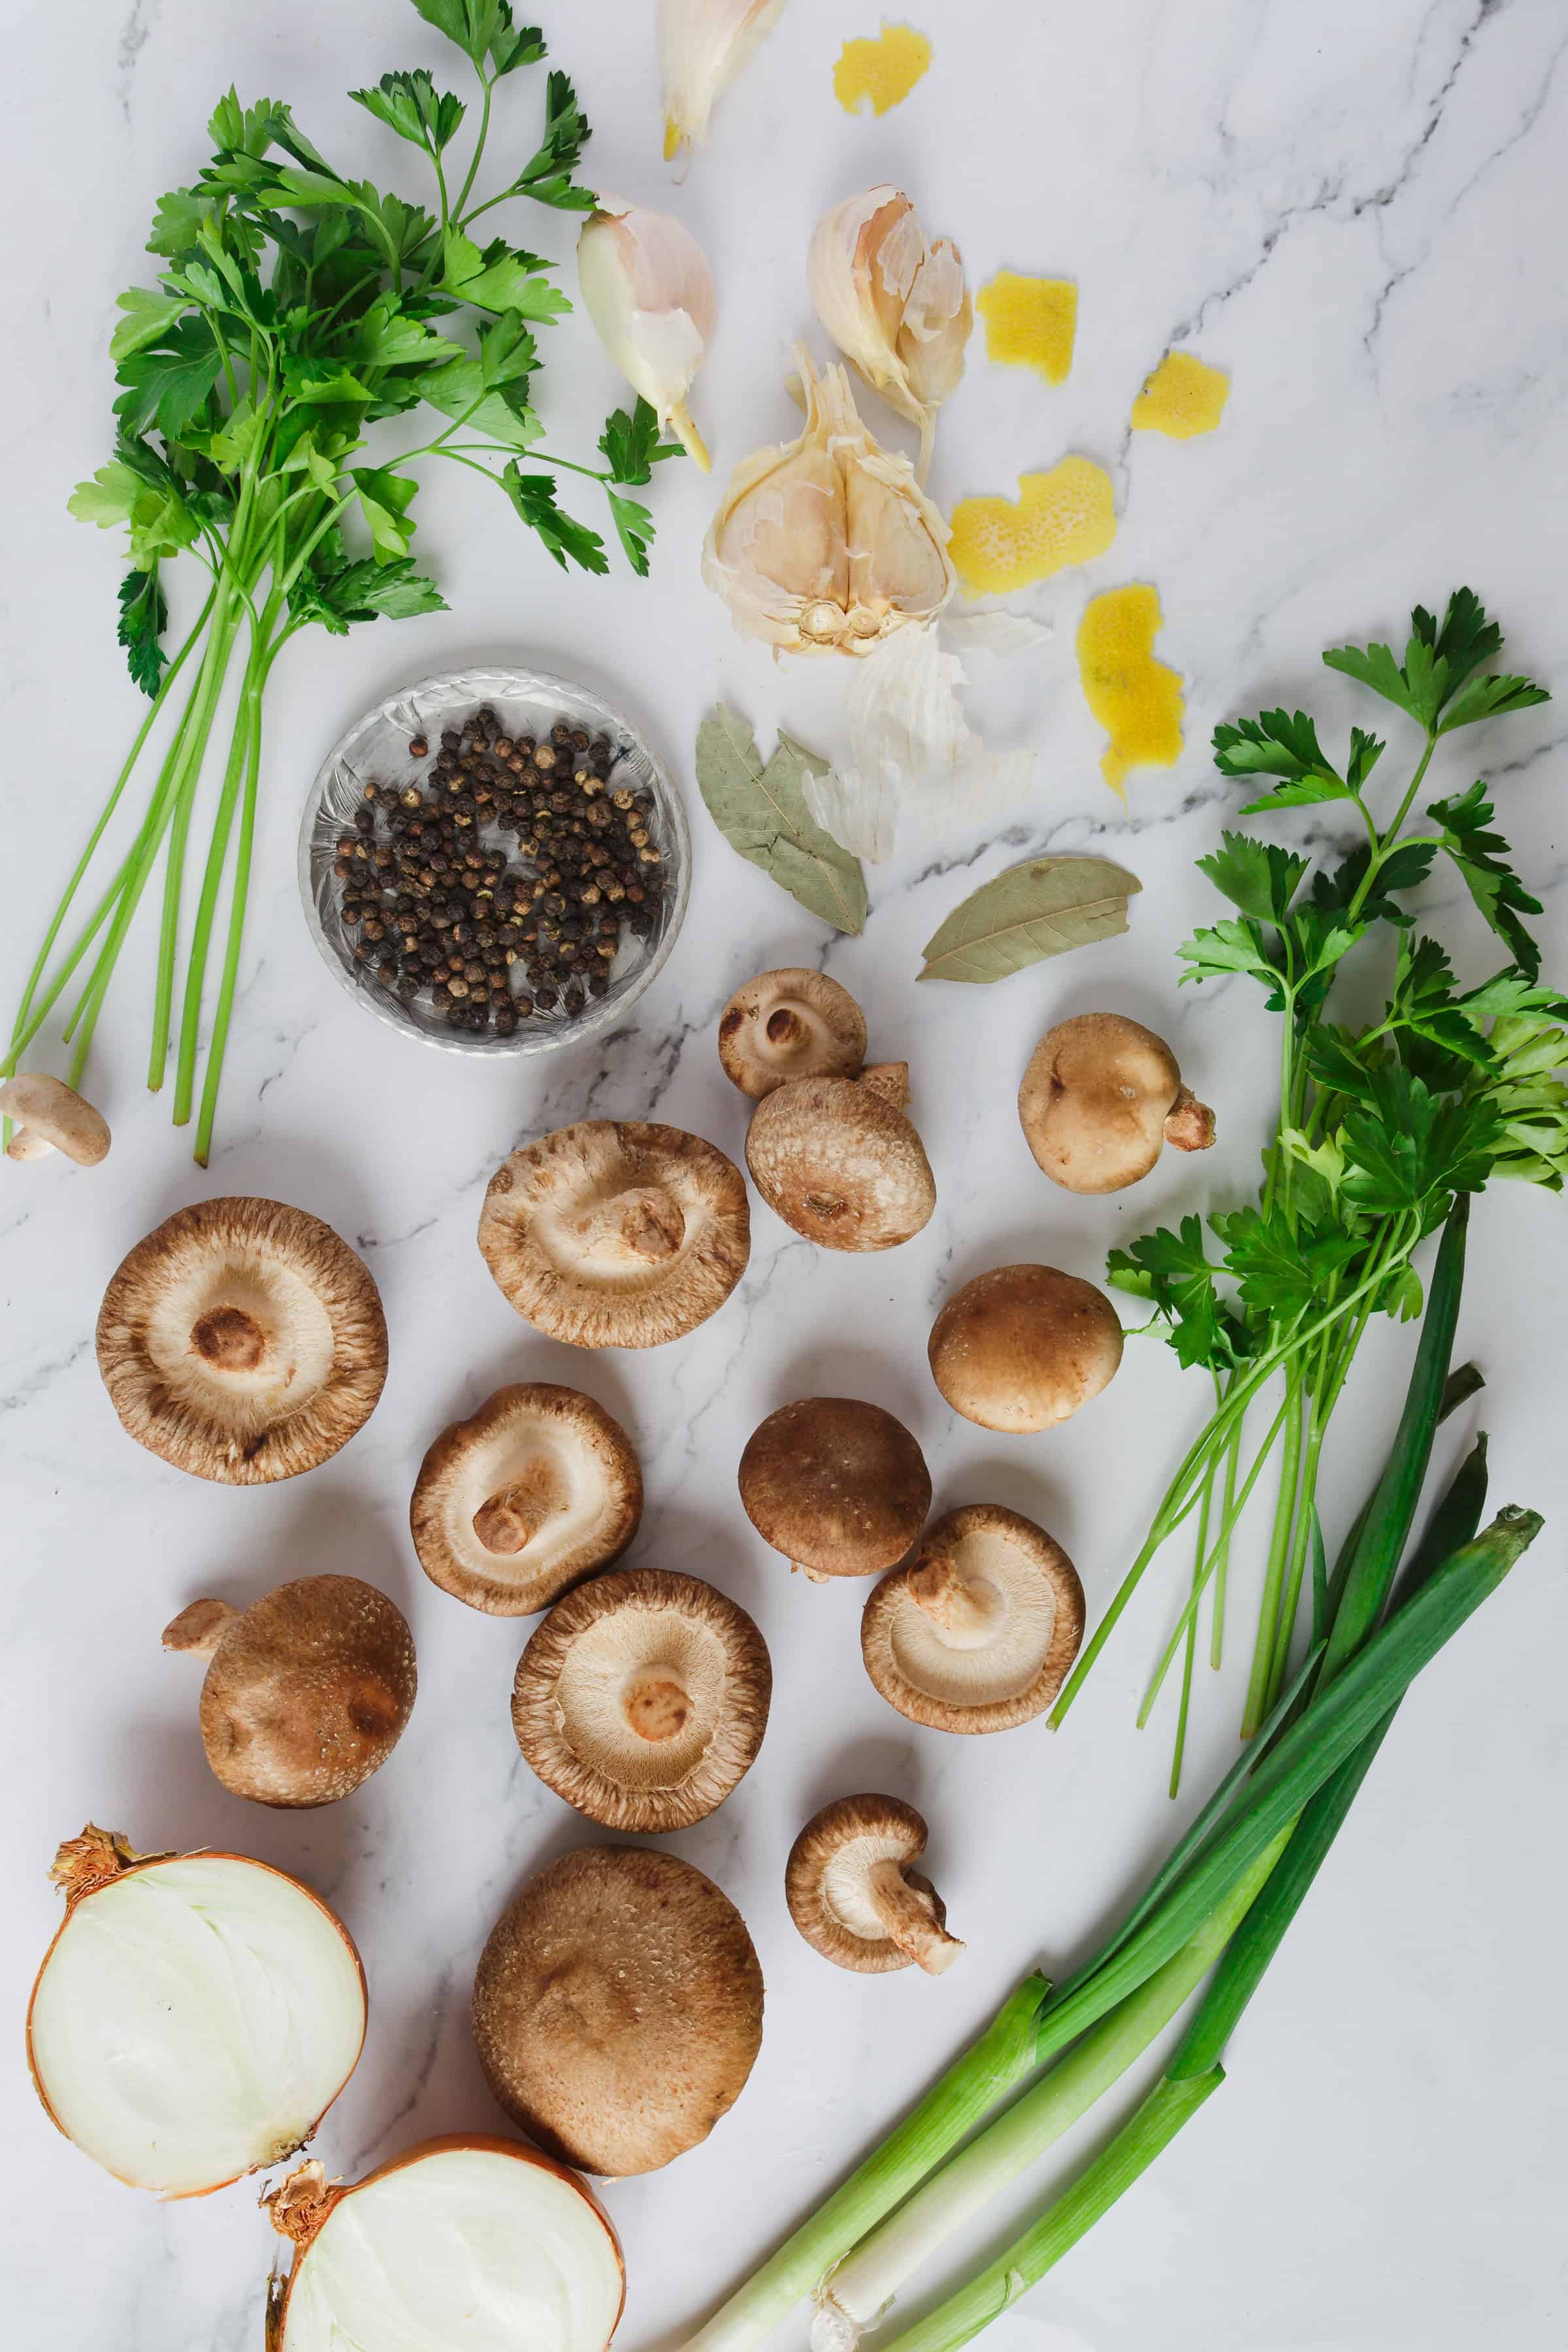 Various fresh ingredients arranged neatly on a marble surface including shiitake mushrooms, garlic cloves, green onions, parsley, an onion halved, peppercorns, and lemon zest.